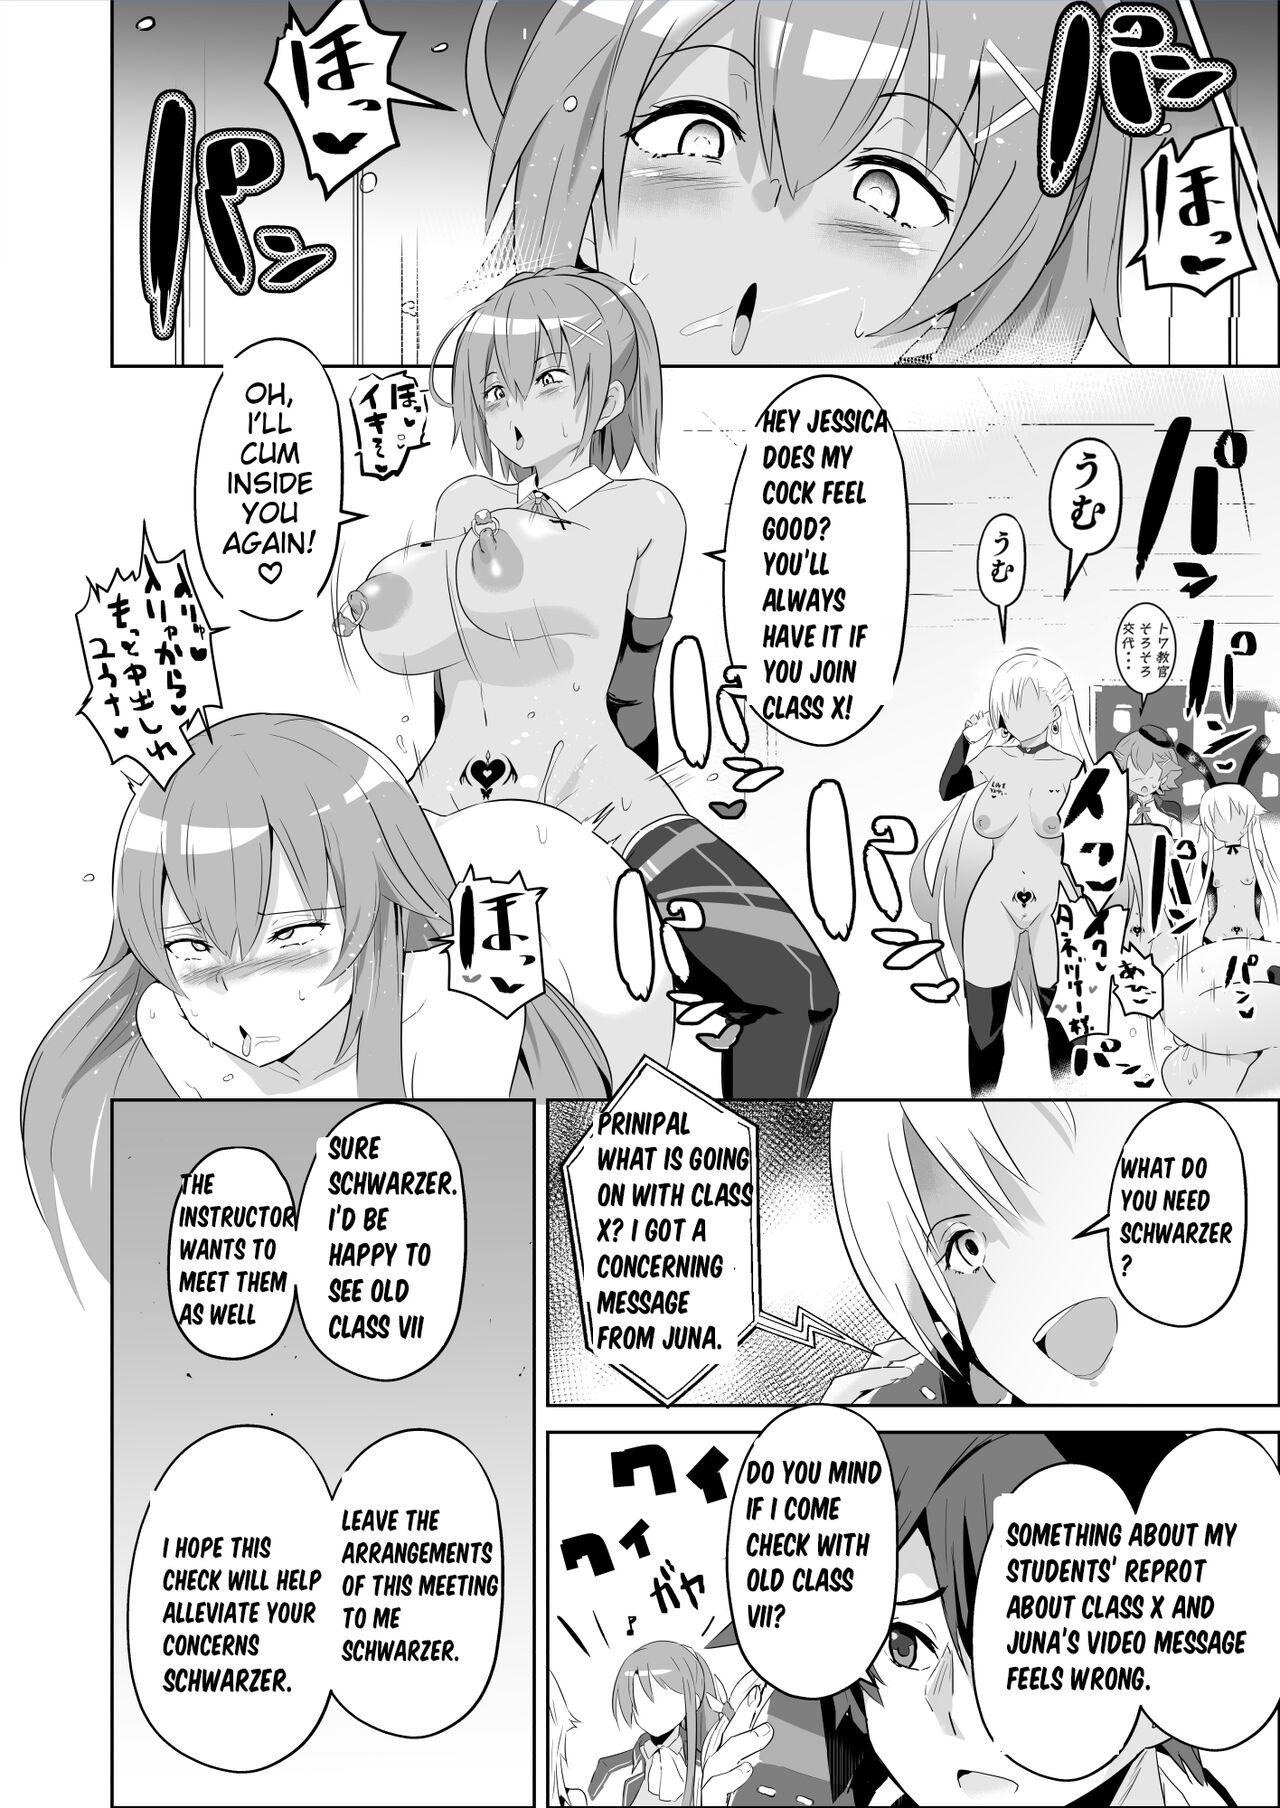 Passion Hypnosis of the New Class VII - Aftermath - The legend of heroes | eiyuu densetsu Hunks - Page 2